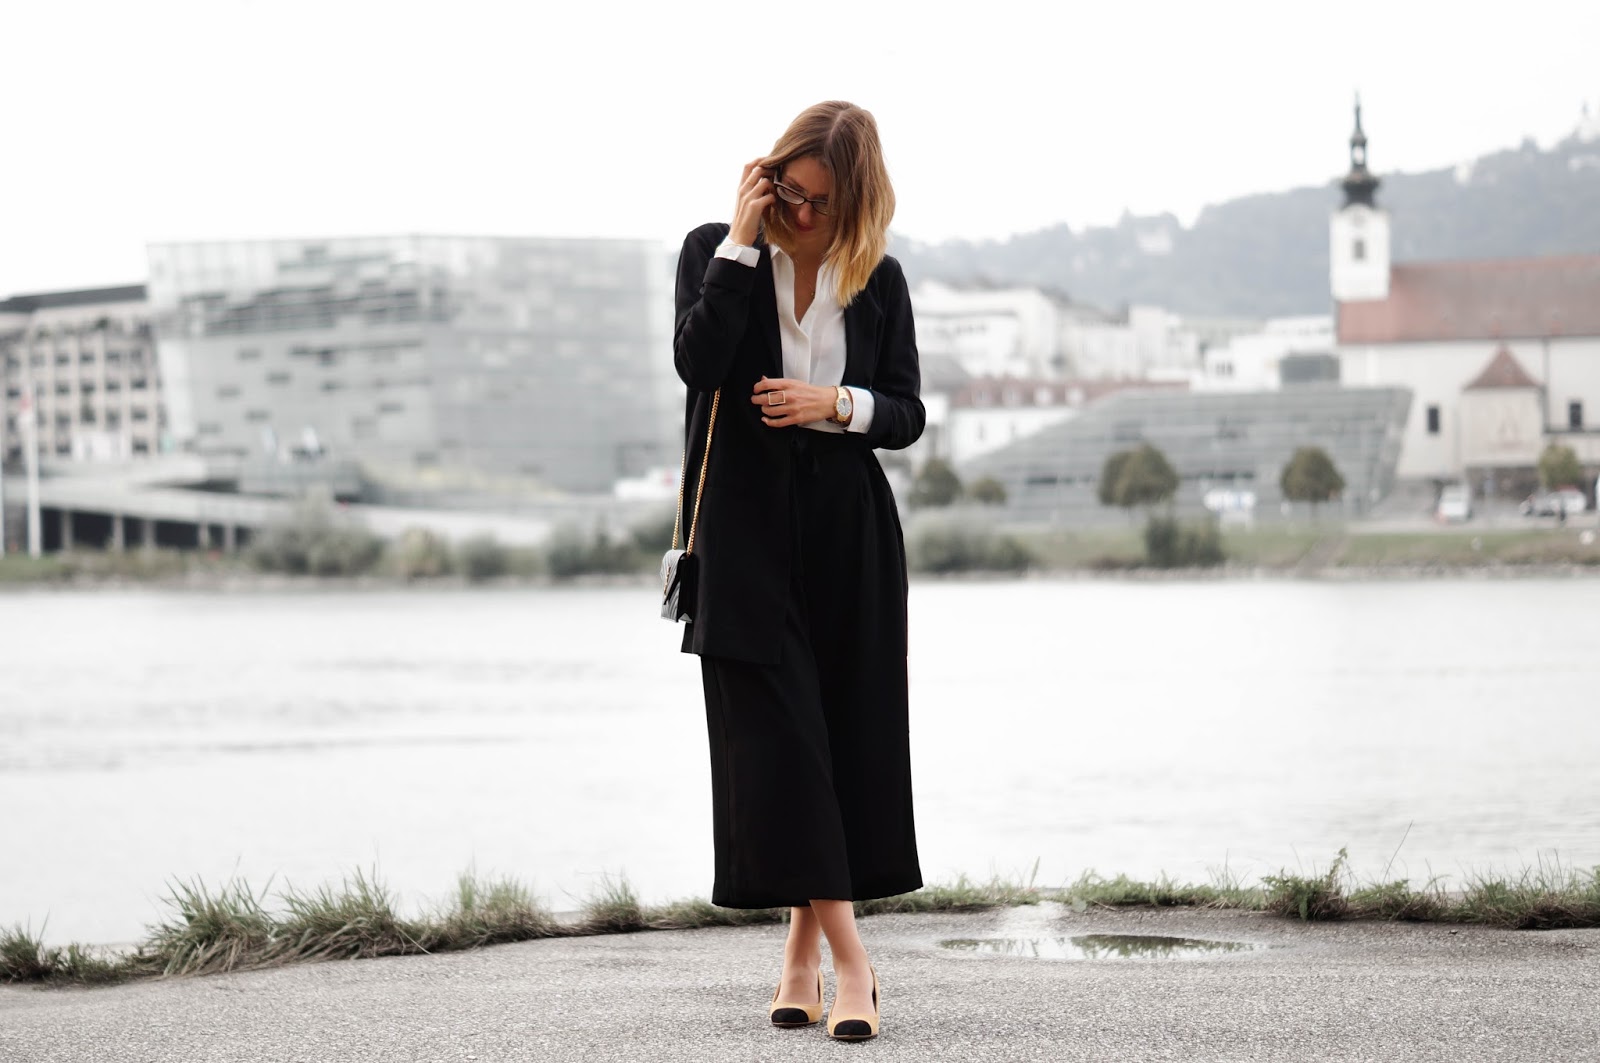 CHIC IN CULOTTES